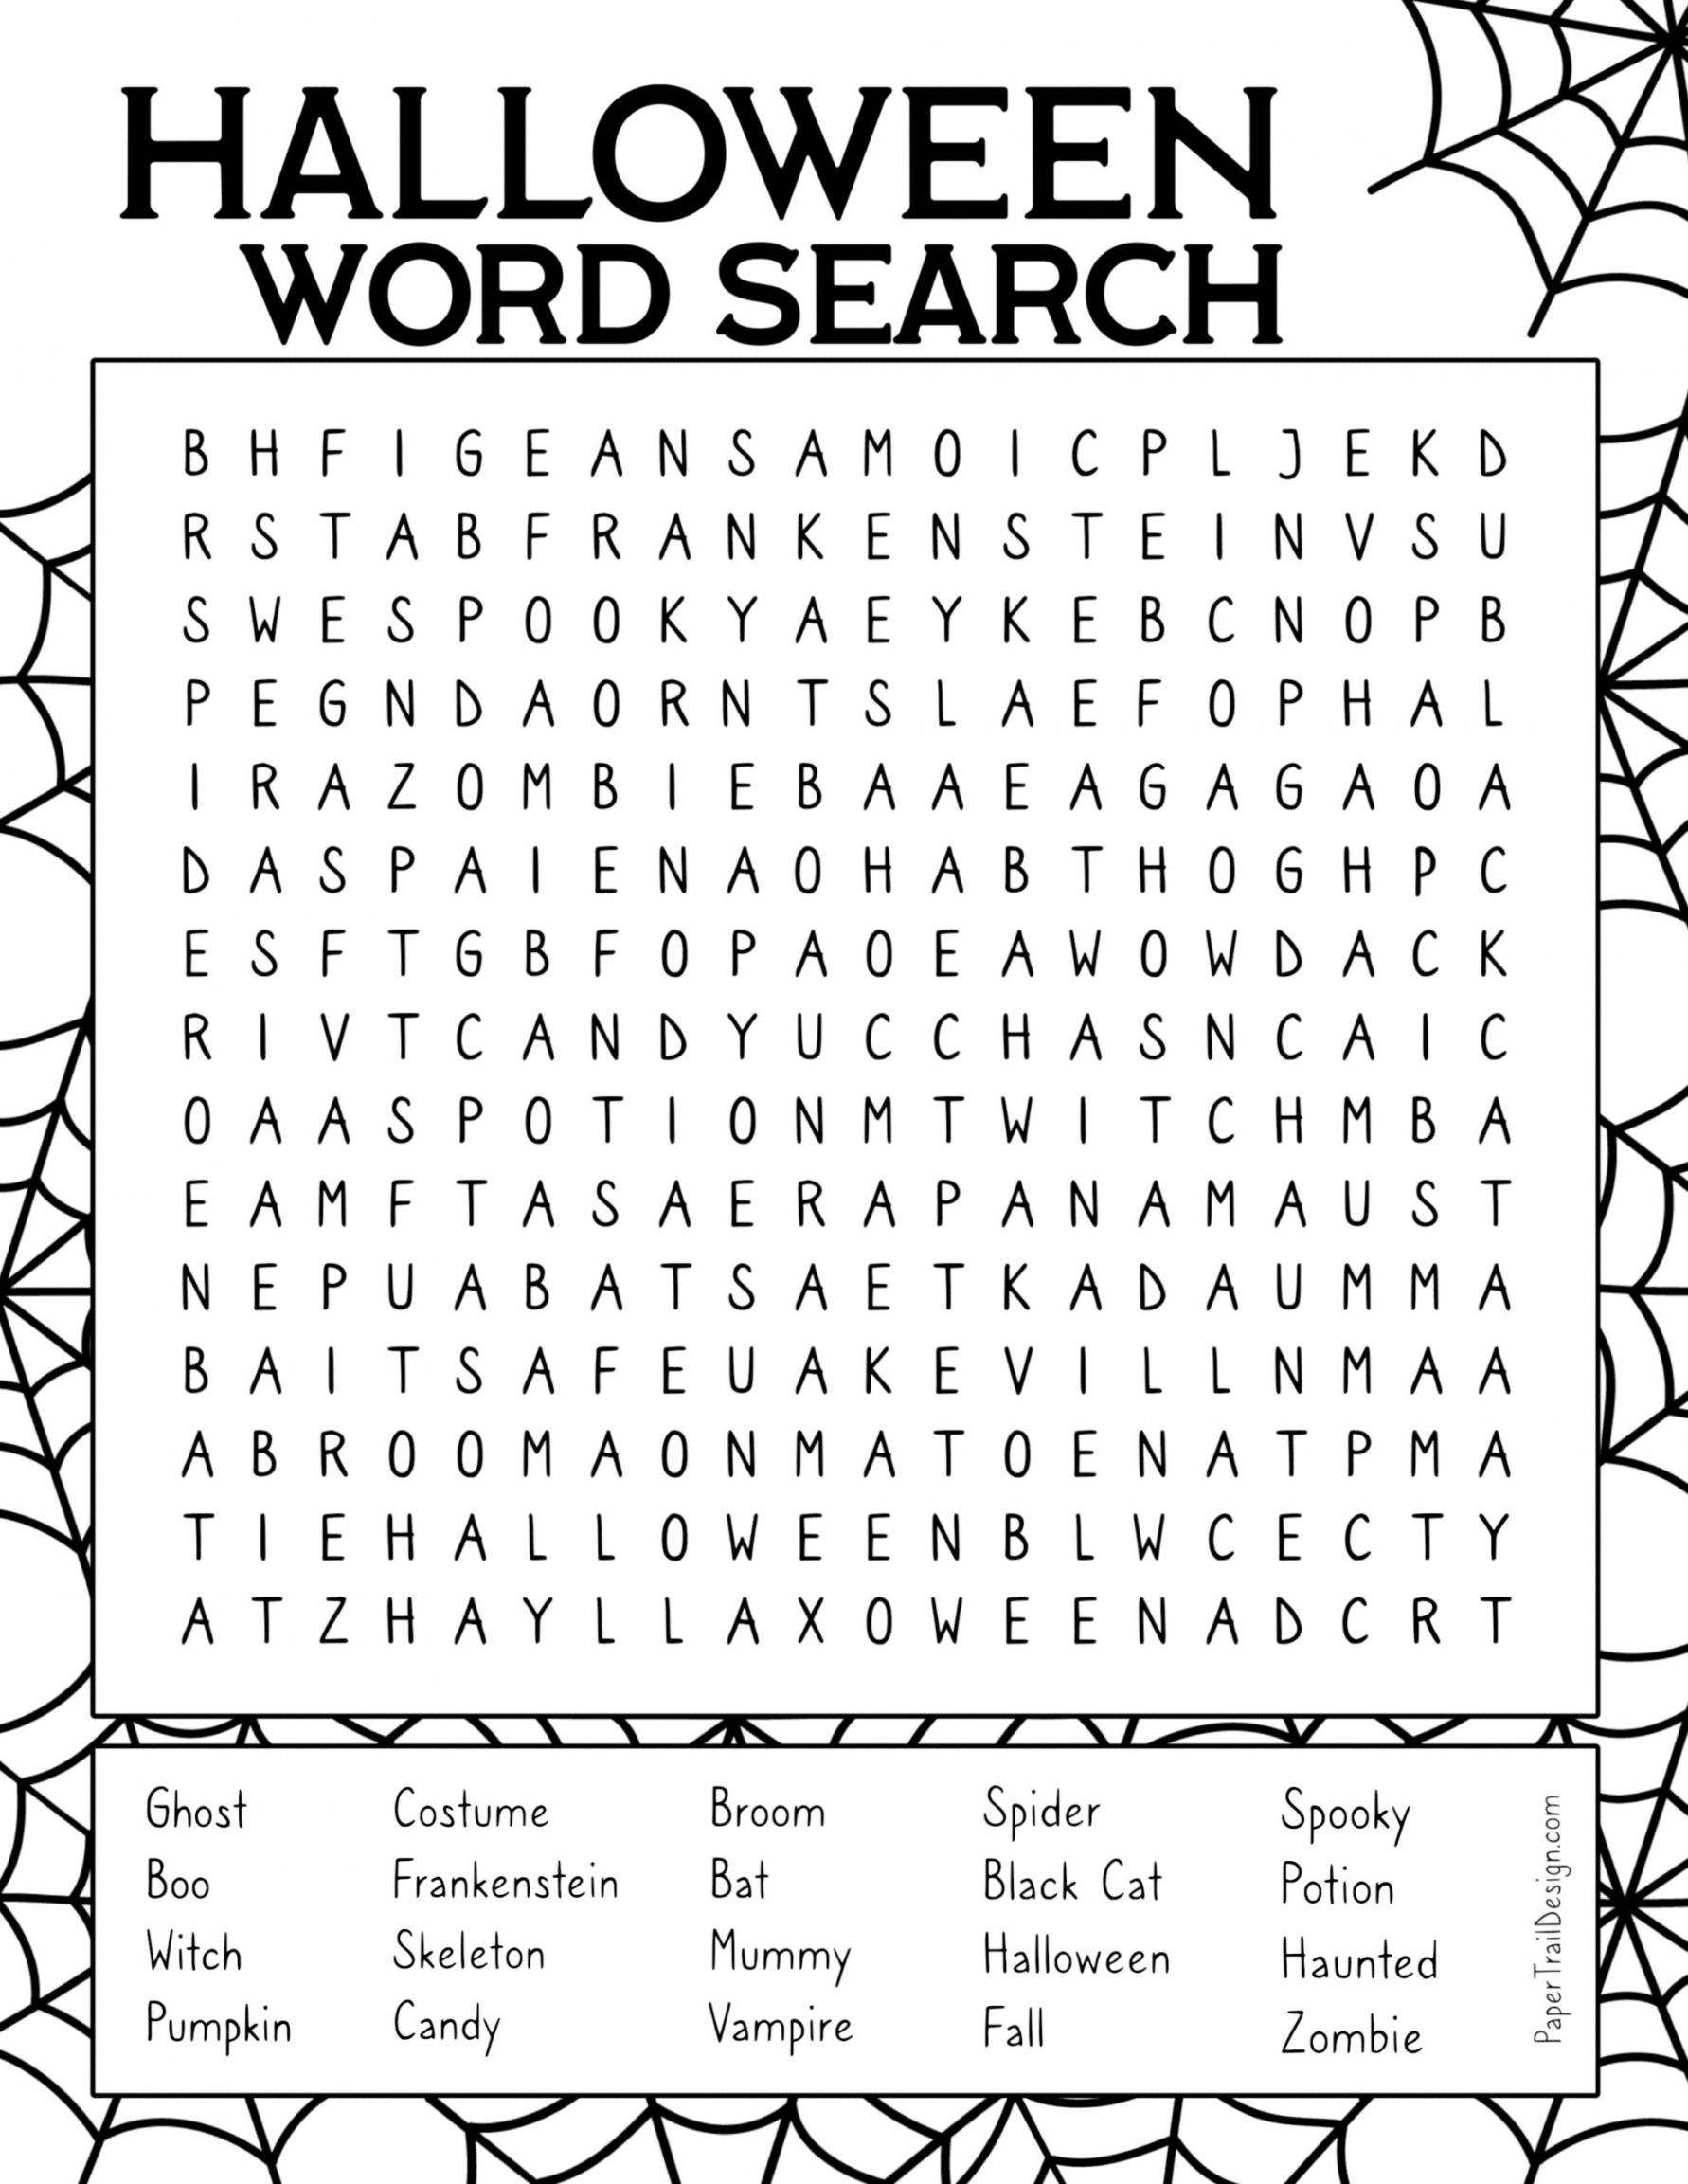 Free Printable Halloween Word Search - Paper Trail Design - FREE Printables - Free Printable Halloween Word Search